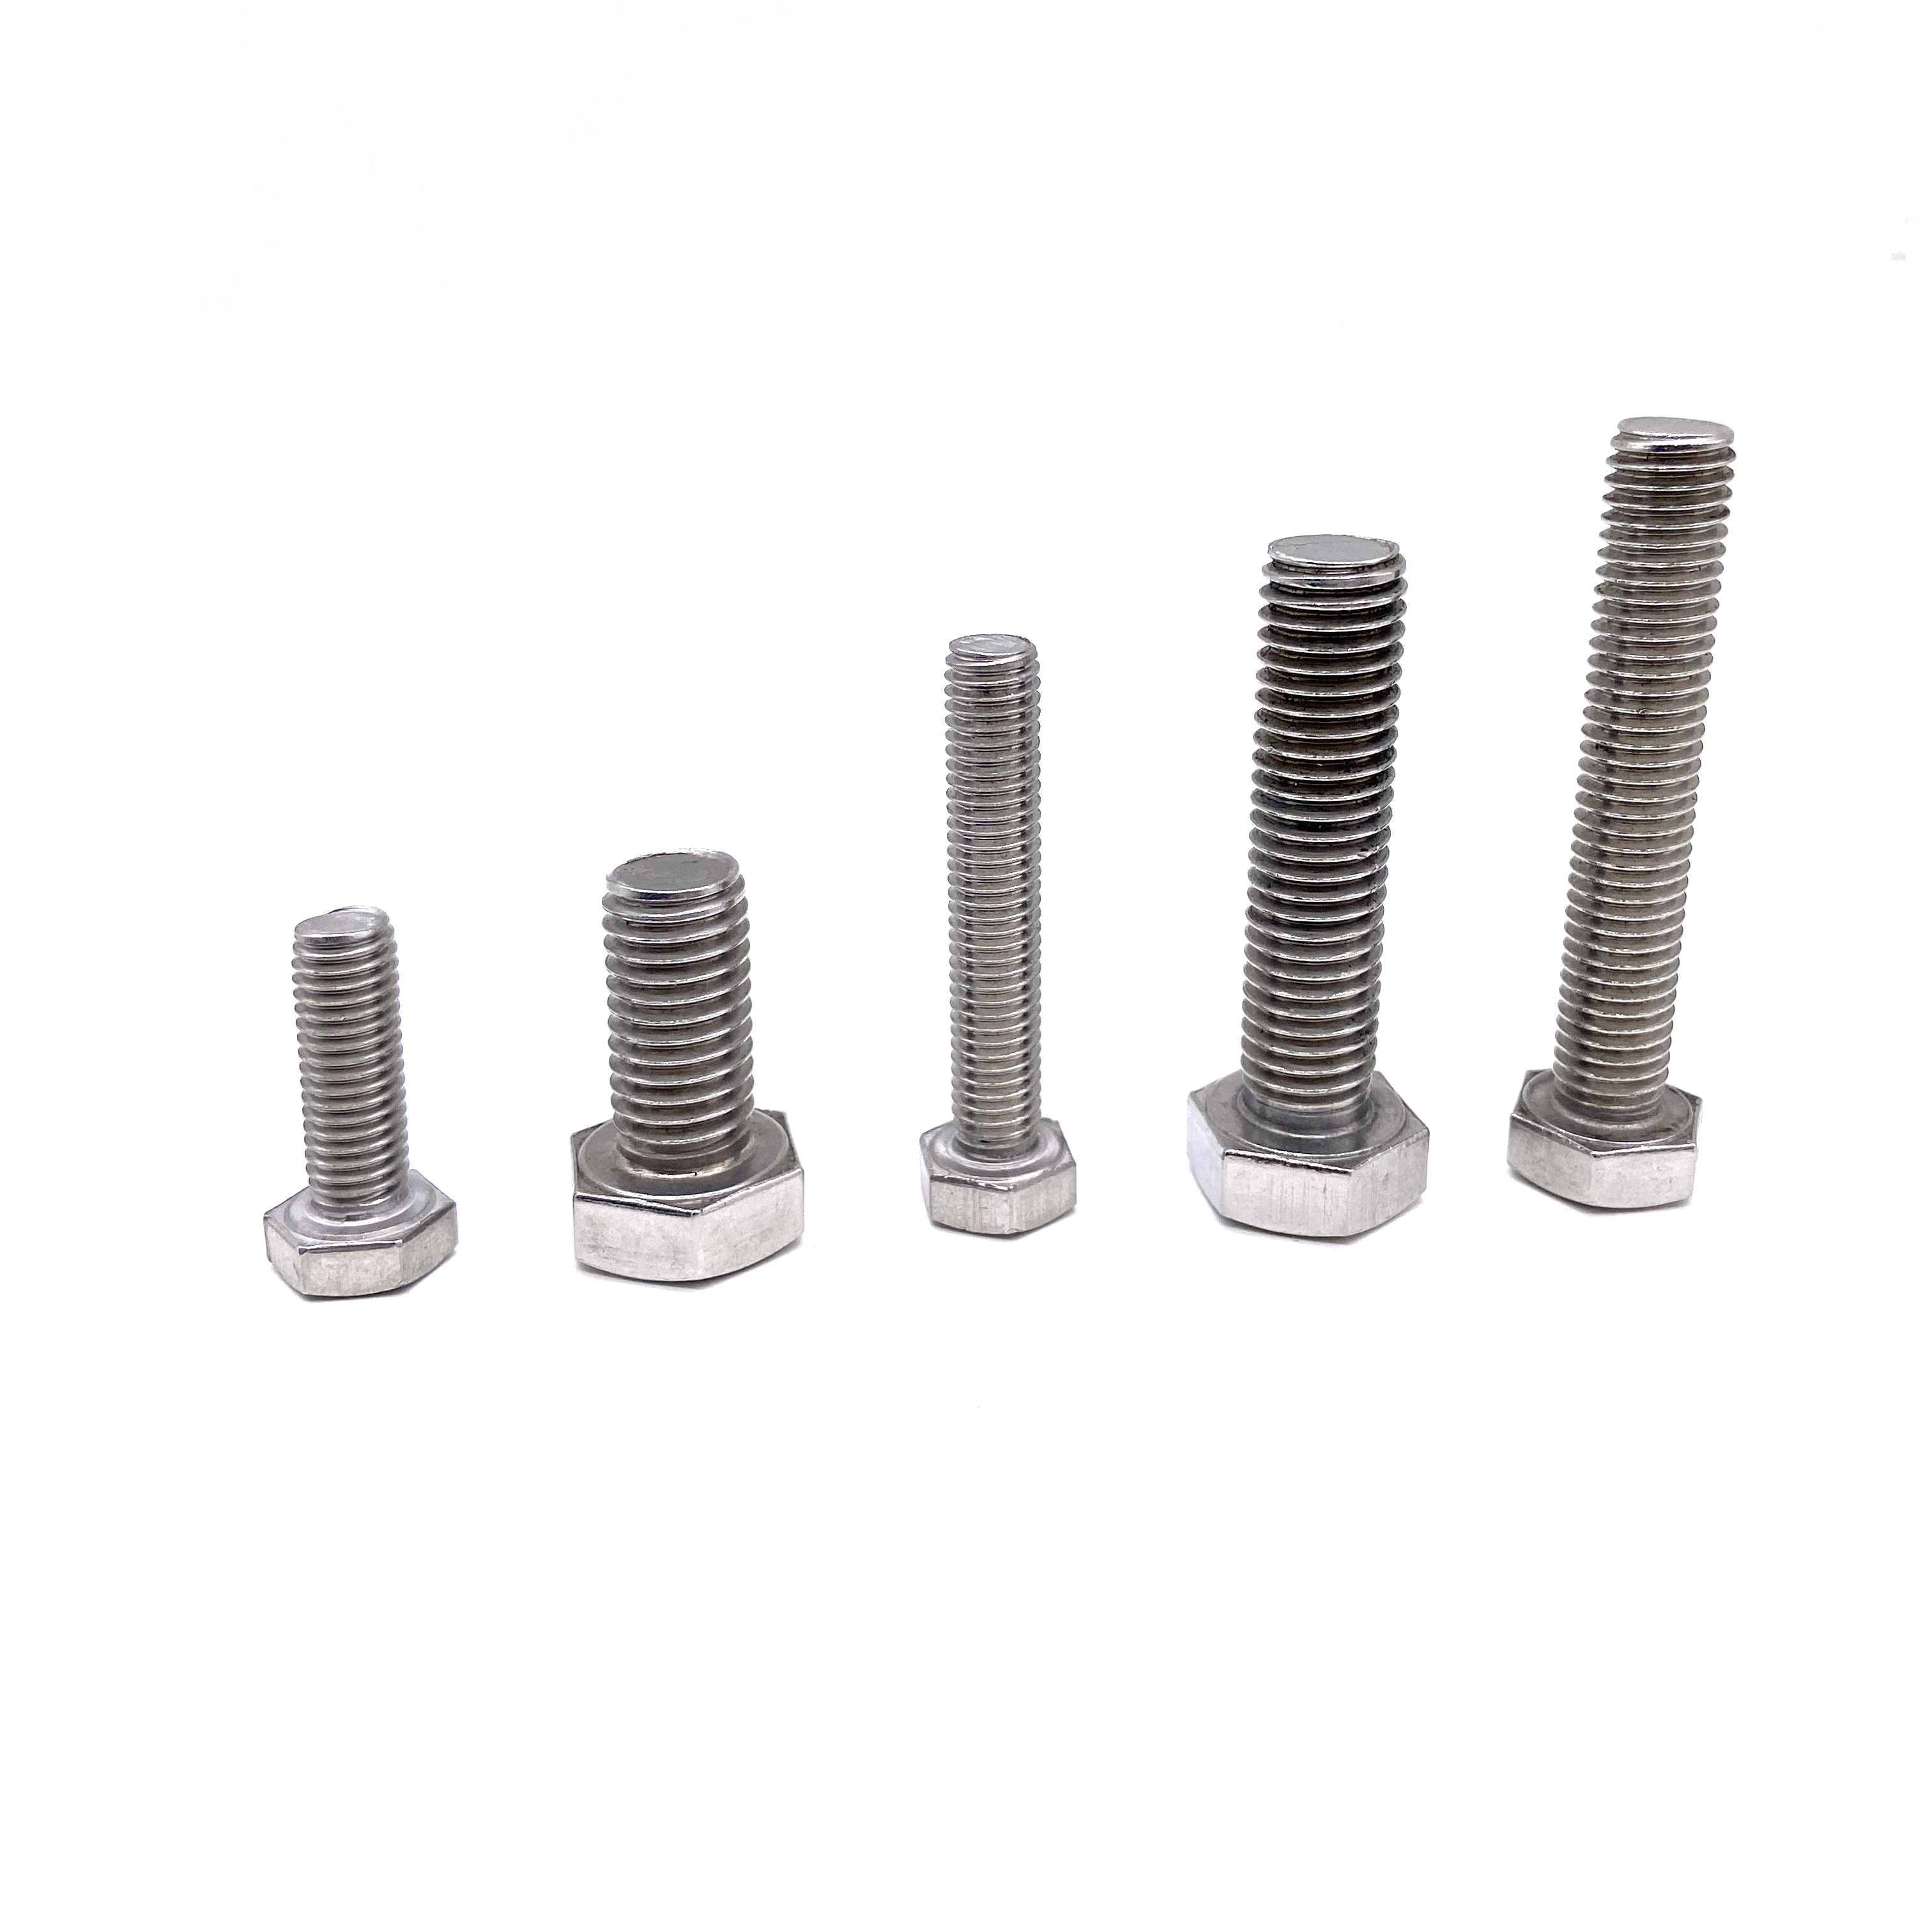 DIN933 M5 M10 M12 M8 A2-70 Stainless Steel Hex Bolts - Buy m10 stainless  steel bolts, m5 stainless steel bolts, m12 stainless steel bolts Product on  hex bolt, u bolt, stainless steel